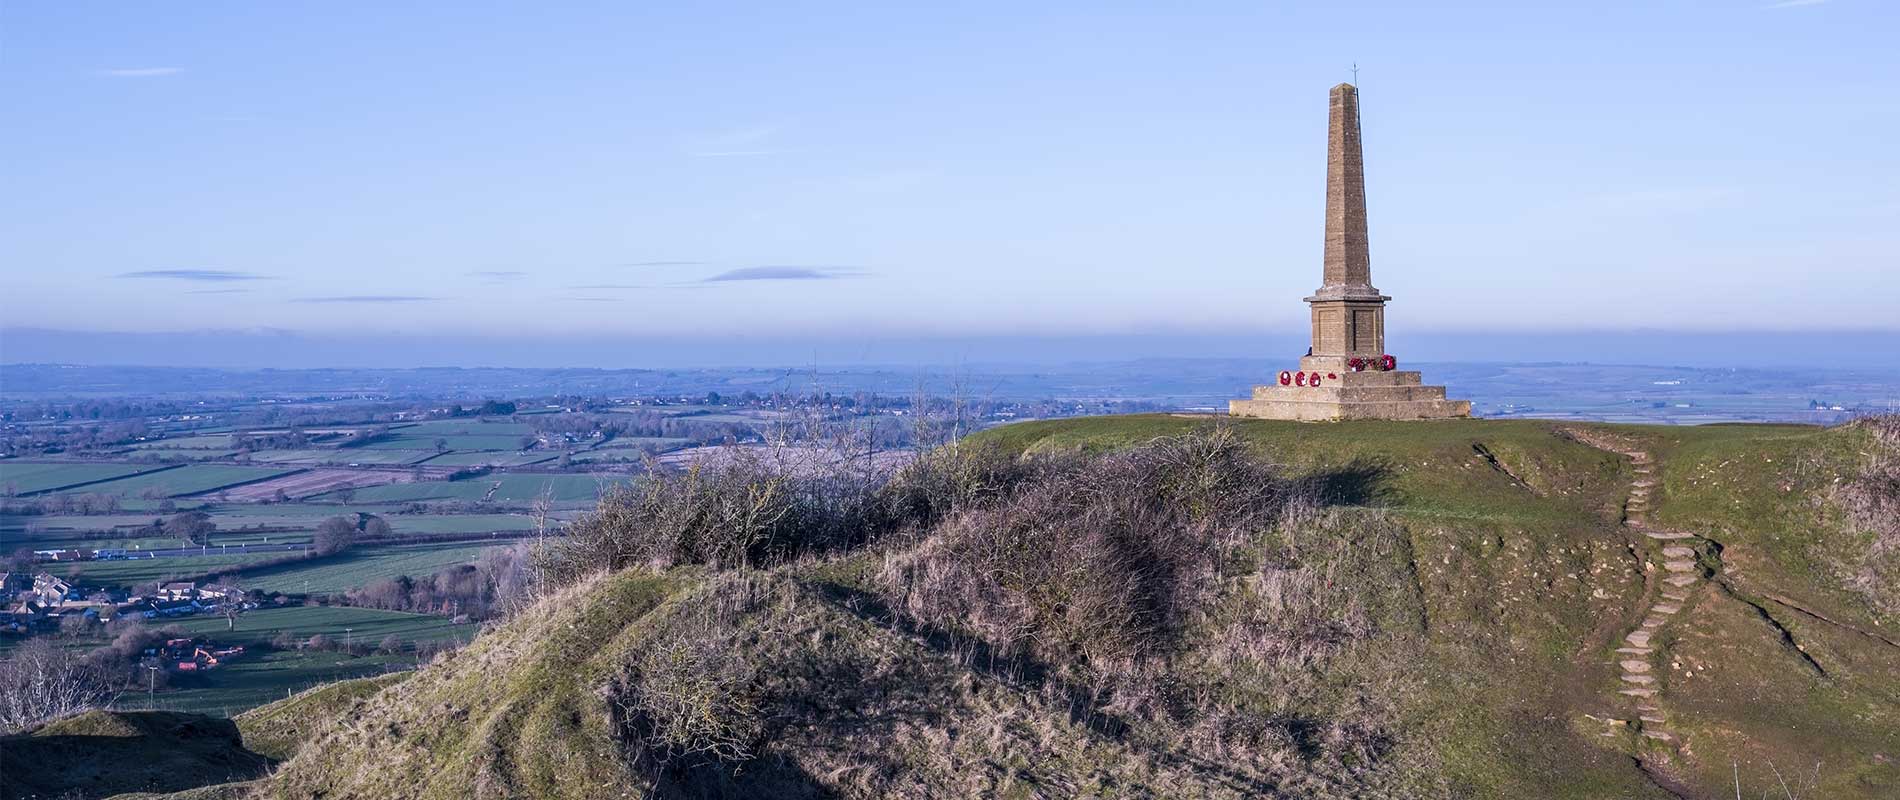 View of Ham Hill Monument looking across the countryside and villages covered by the Hambook